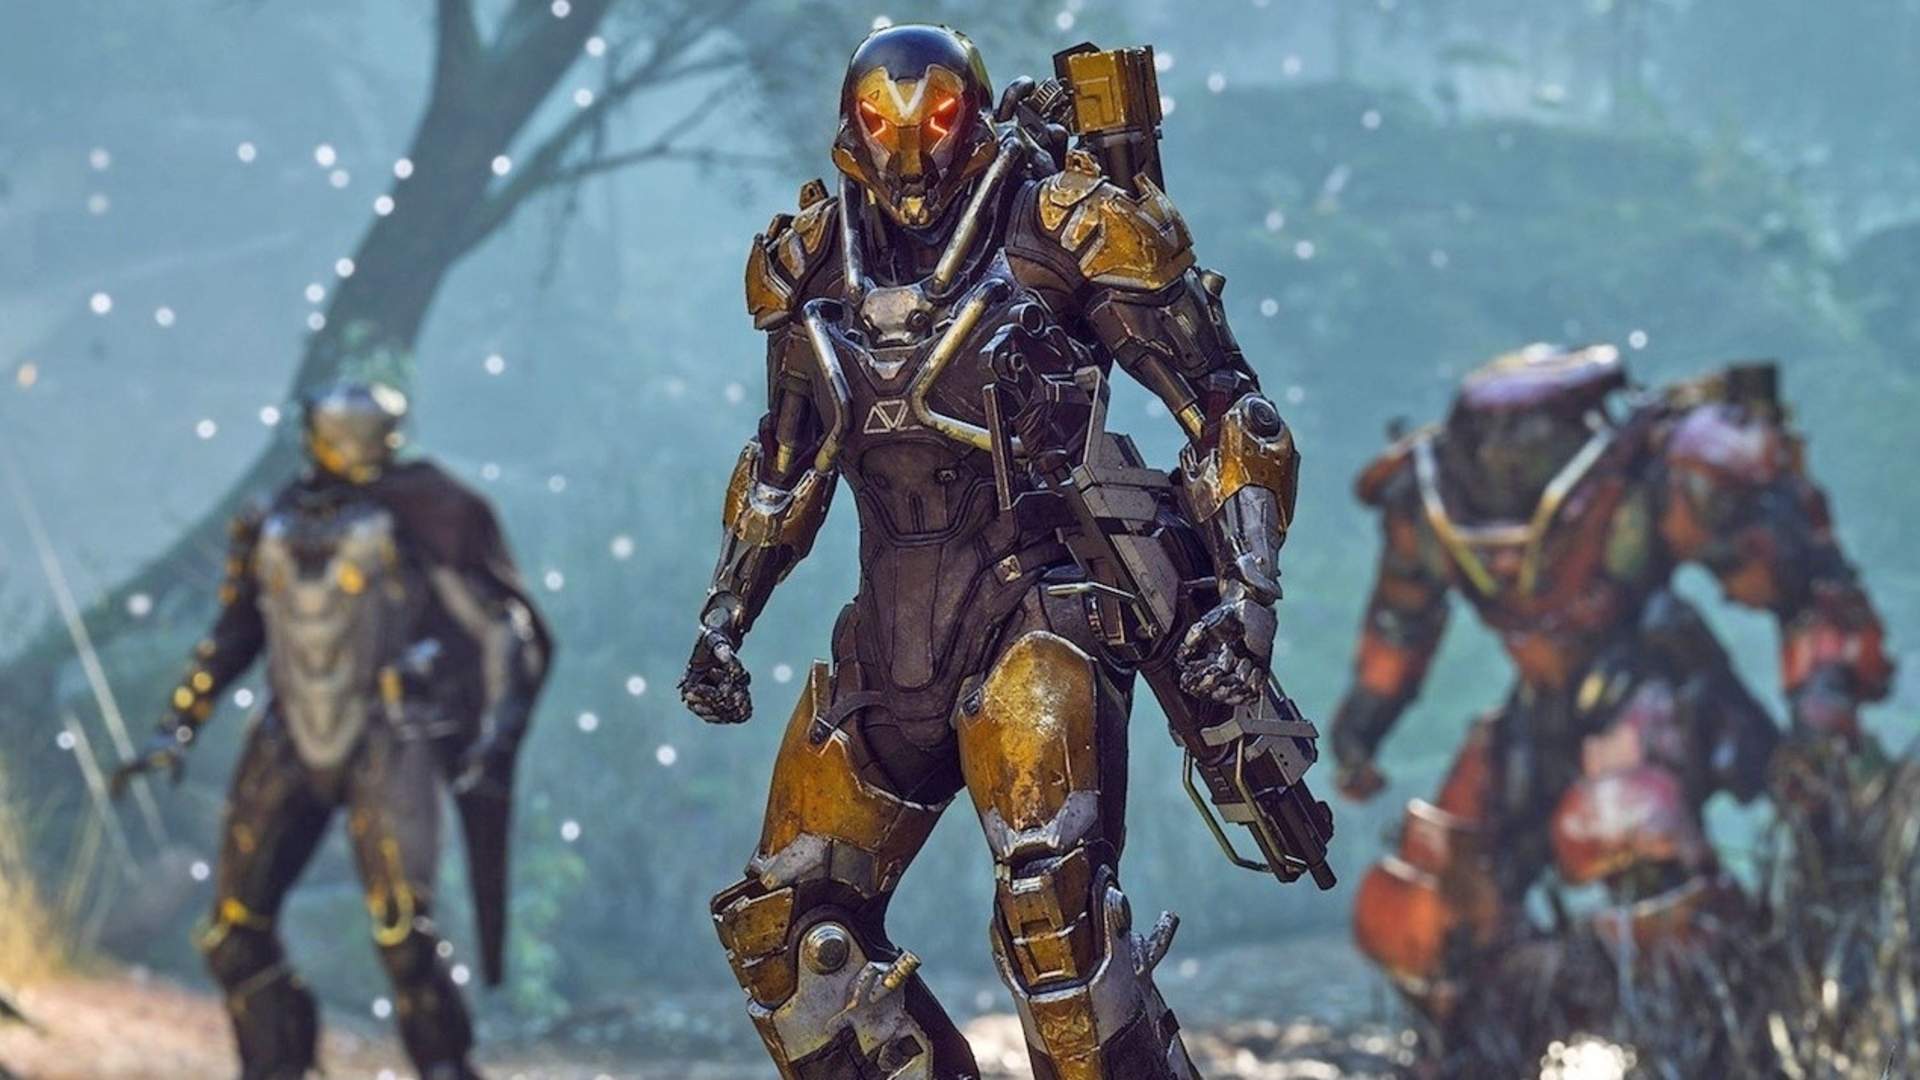 Anthem should be a billion dollar game like Destiny - Now a store is selling the shooter for 1 cent